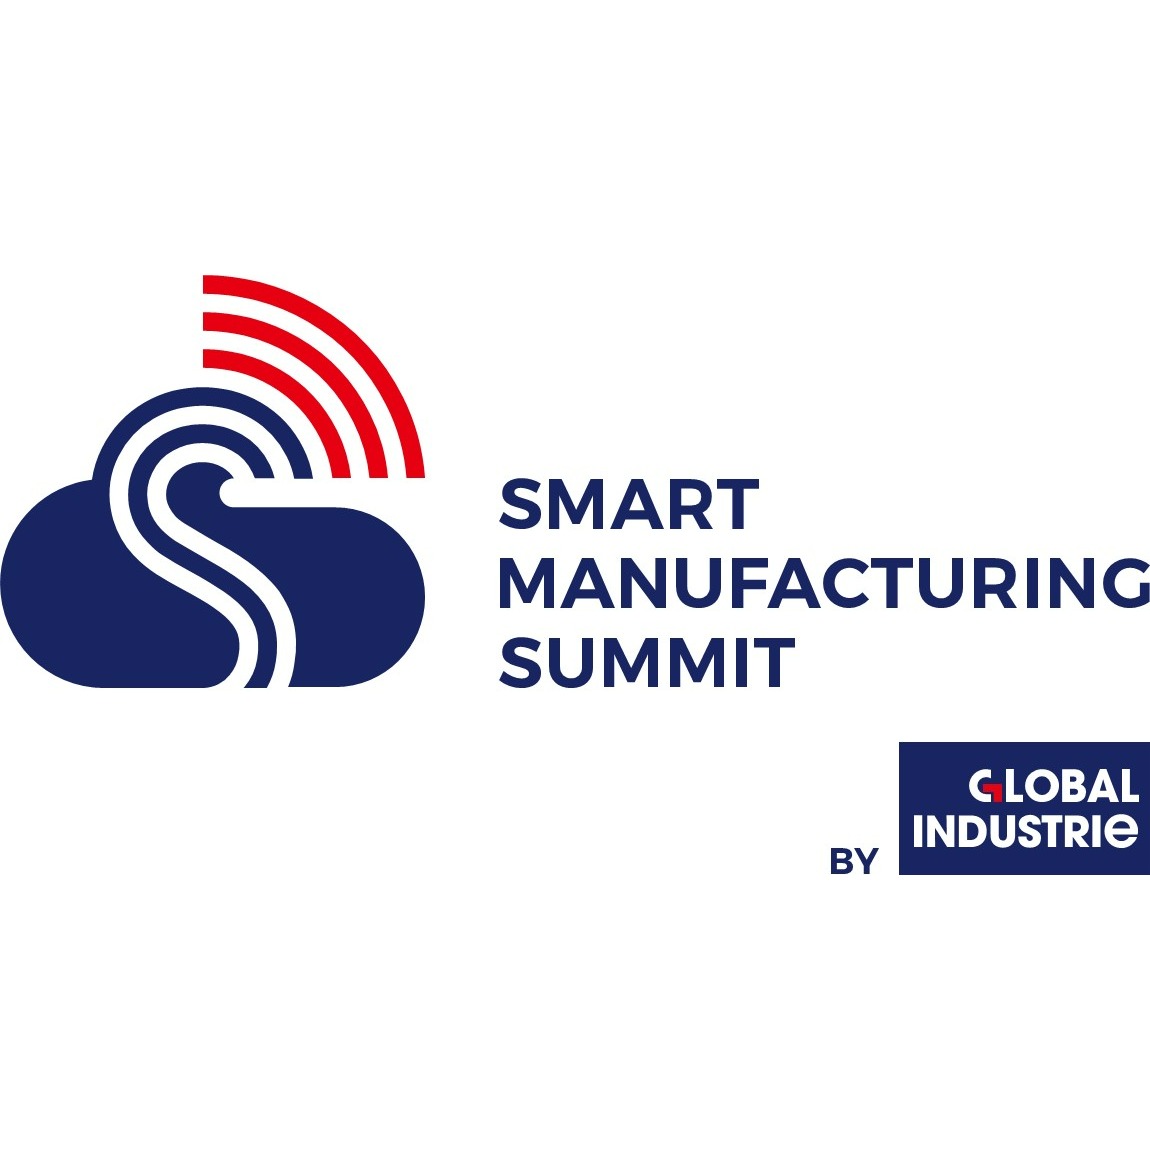 SMART MANUFACTURING SUMMIT BY GLOBAL INDUSTRIE